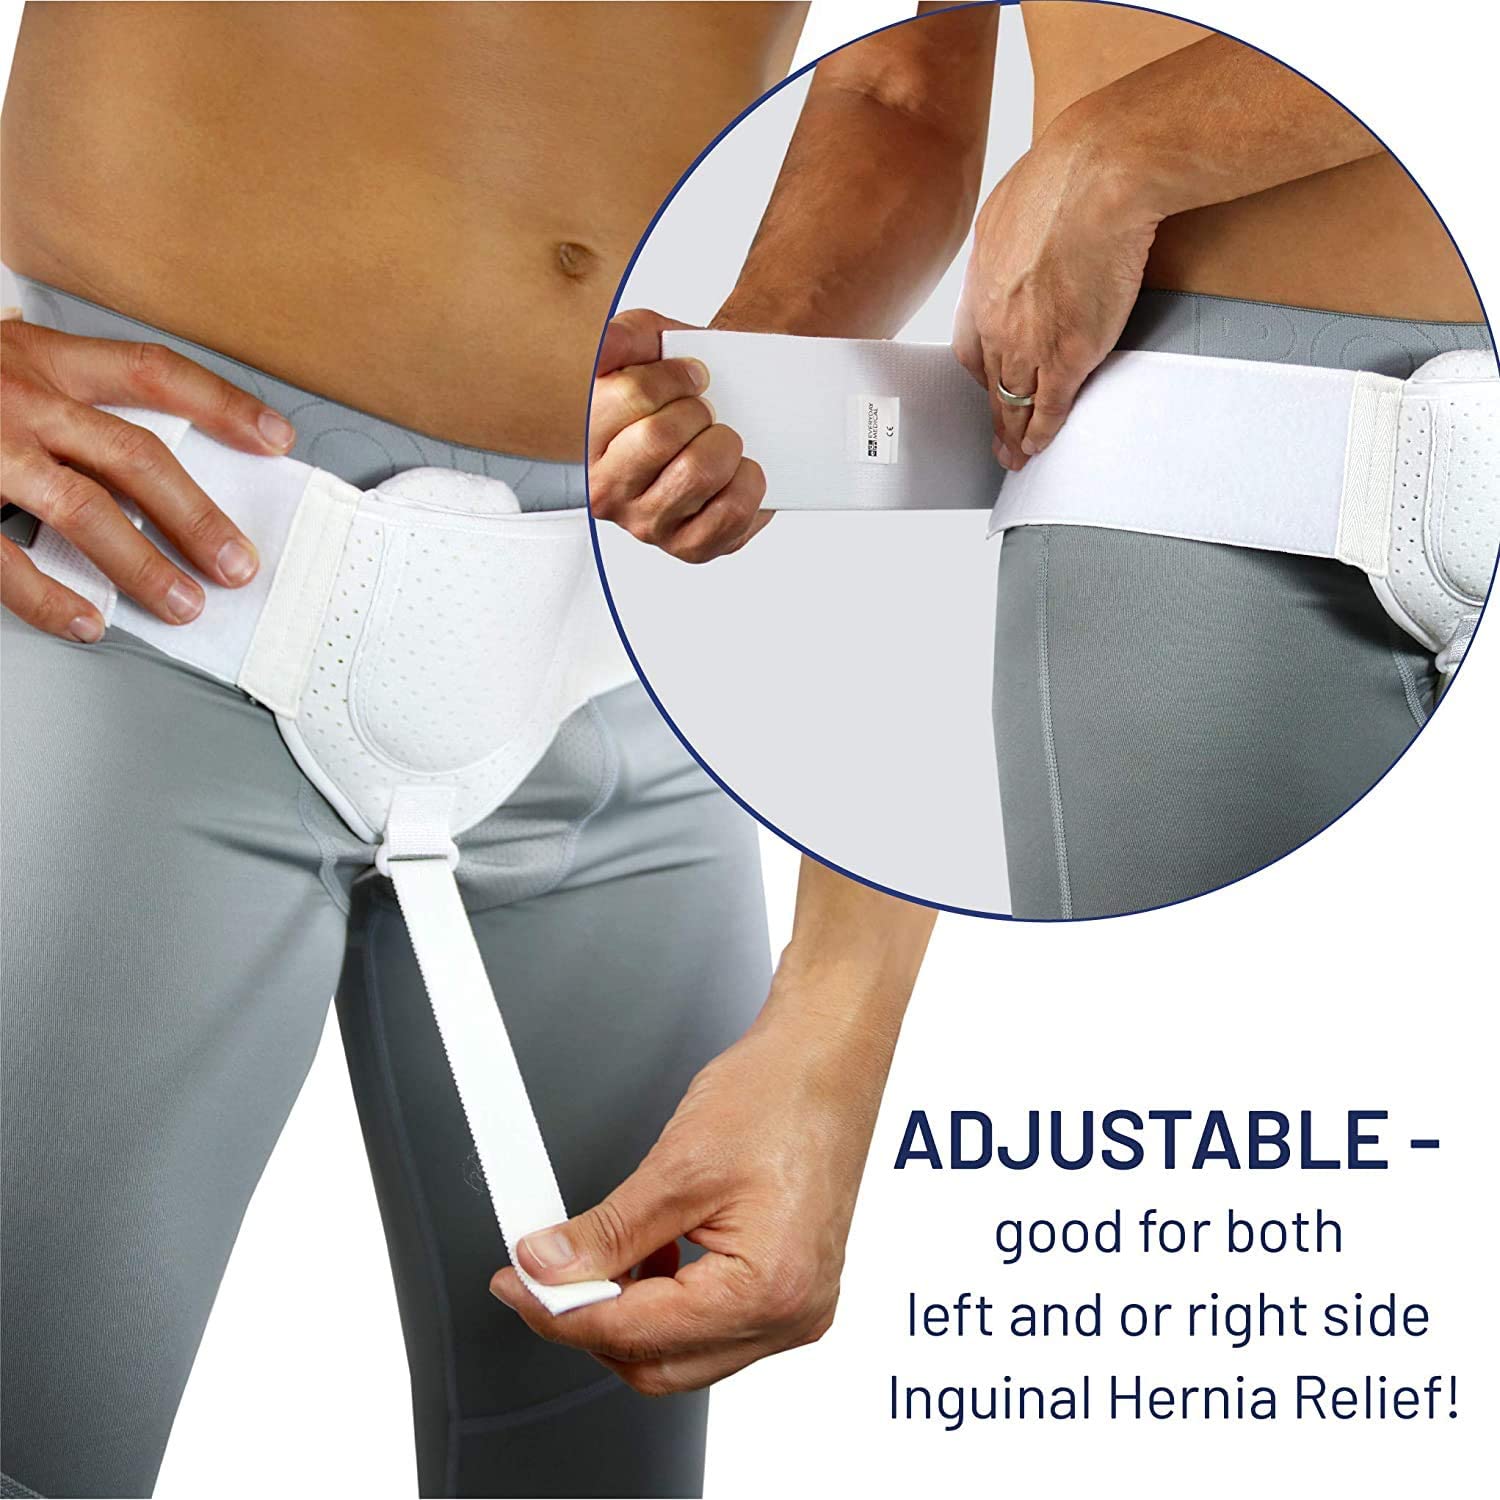 Medical-Hernia-Guard-Inguinal-Hernia-Belt-For-Men-Left-or-Right-Side-Post-Surgery-Inguinal-Hernia-Su-1919257-2